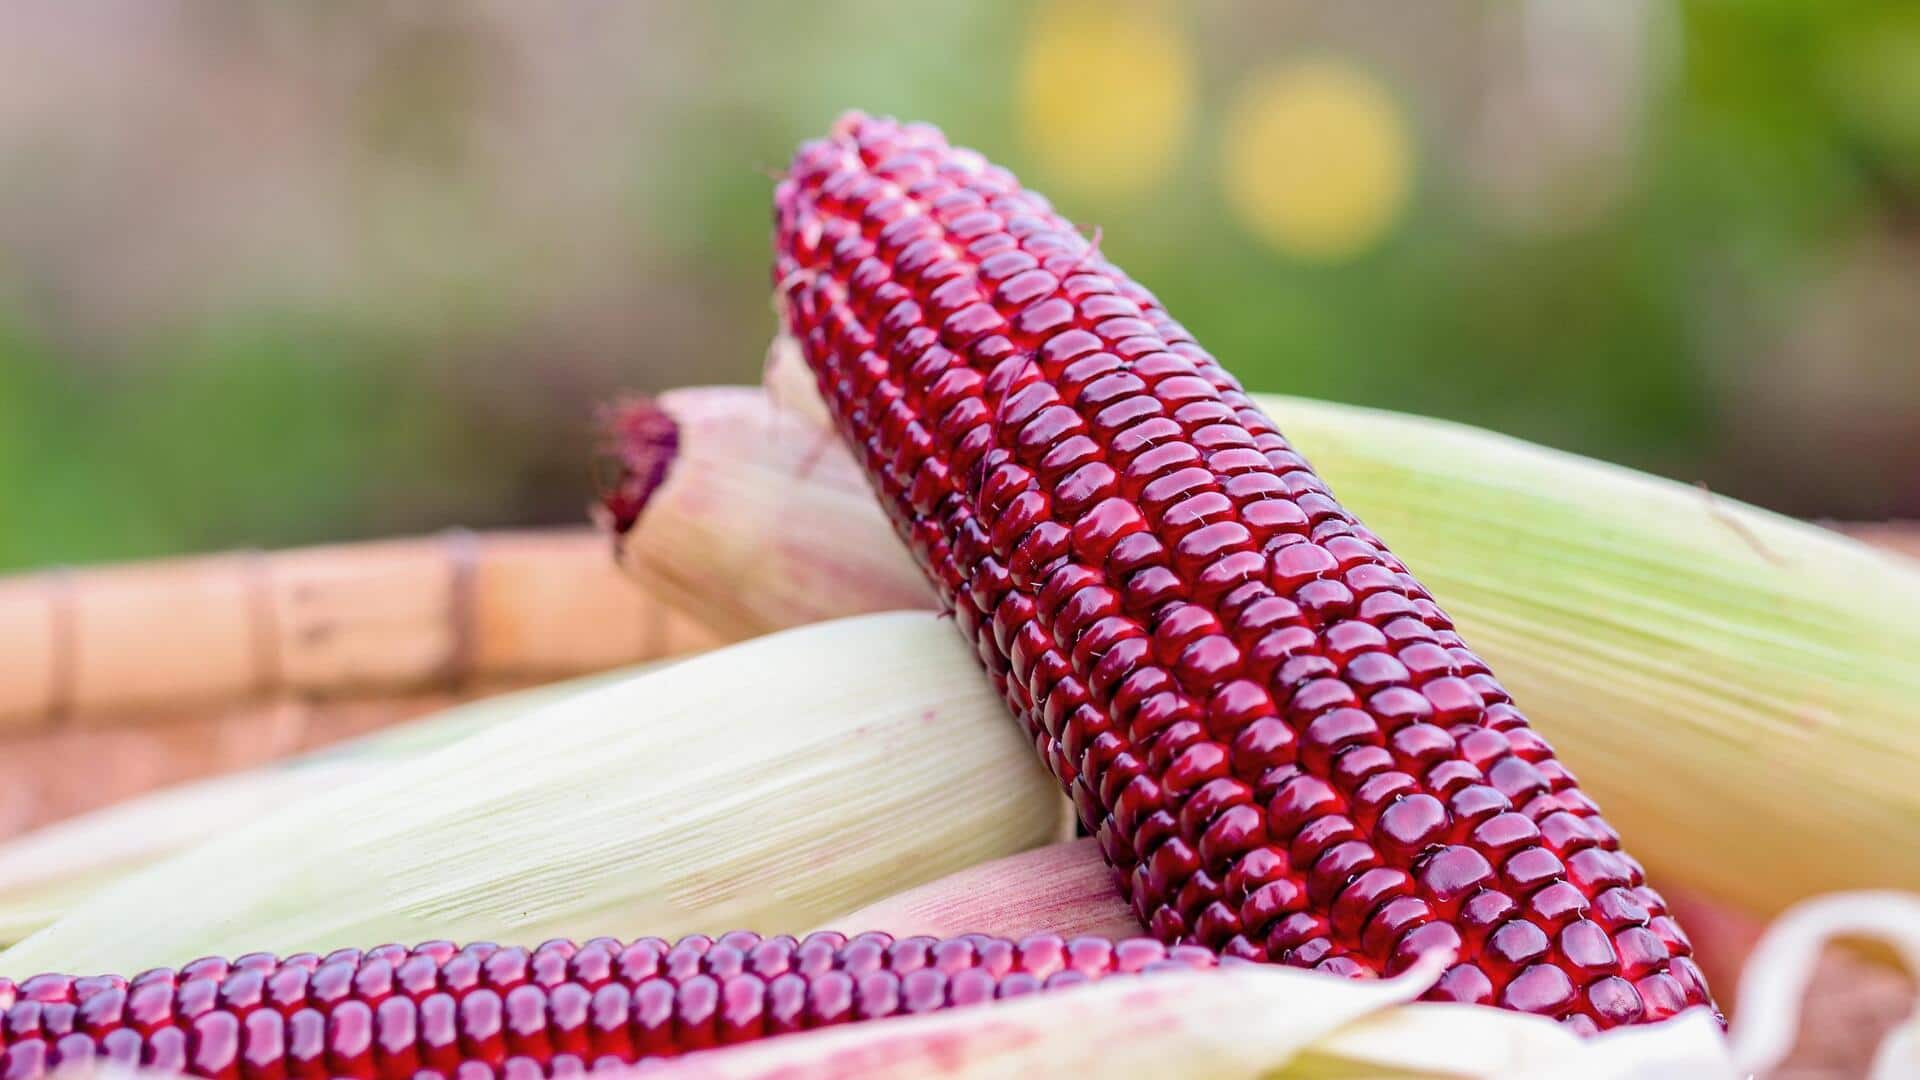 Reviving heritage: The rediscovery of Jimmy Red Corn